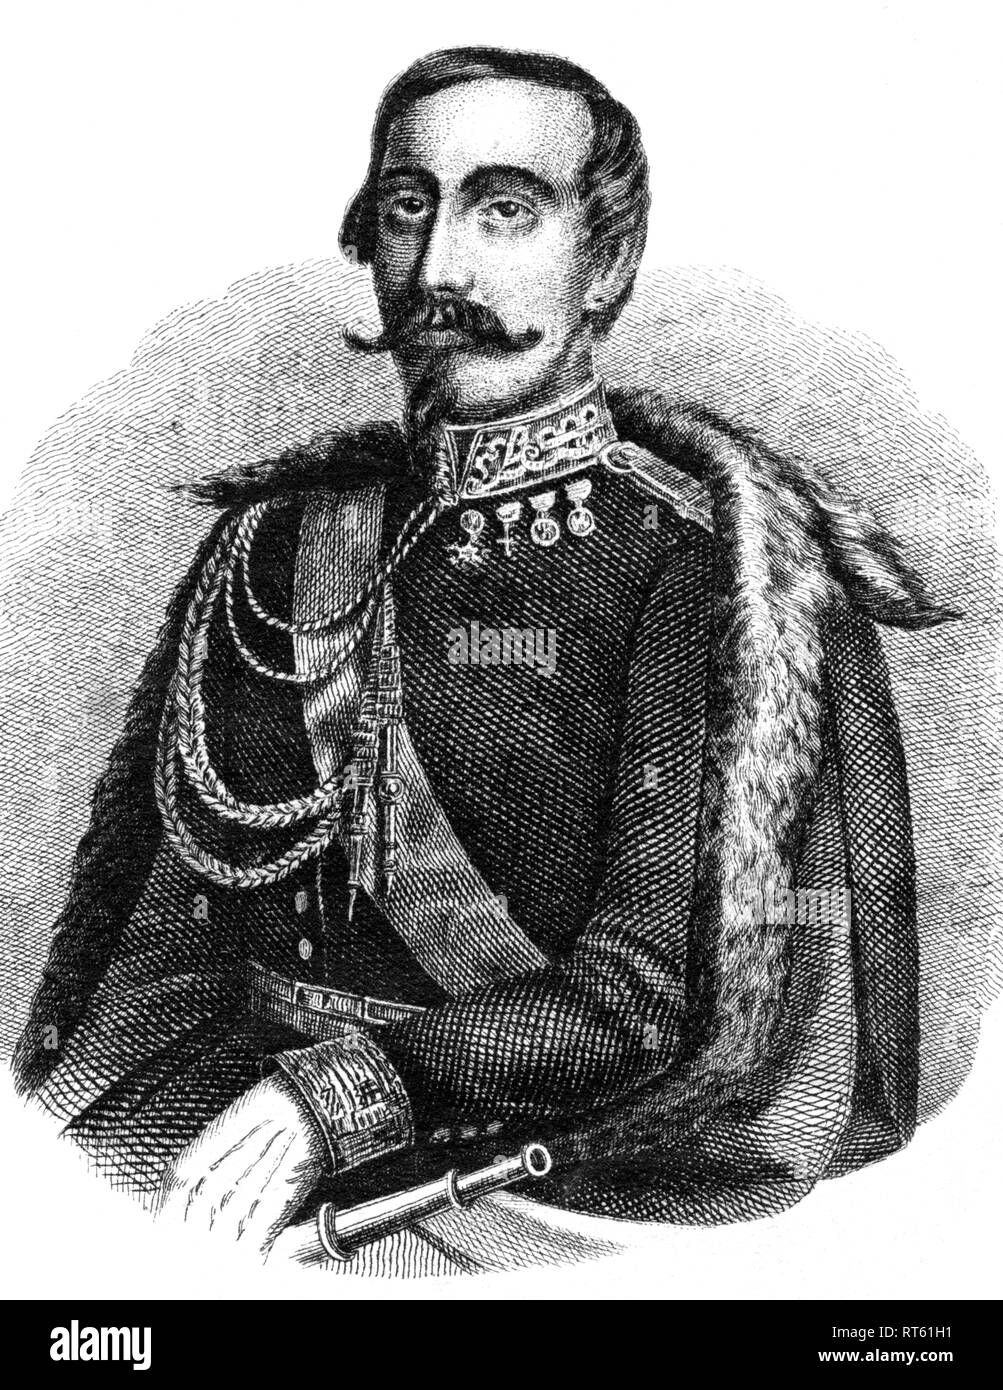 Alfons della Marmora, born 1812 in Turin, Secretary of war of Sardinia and later commanding officer of the Sardinian army in the Crimean War.  Lithography from ' National-Kalender für alle Kronländer der kaiserl. königl. österreichischen Monarchie', (National calender for all crownlands of the imperial Monarchy of Austria), 1856, lithographer W. Klimt, published by Carl Wilhelm Medow, Leitmeritz / Praha., Additional-Rights-Clearance-Info-Not-Available Stock Photo